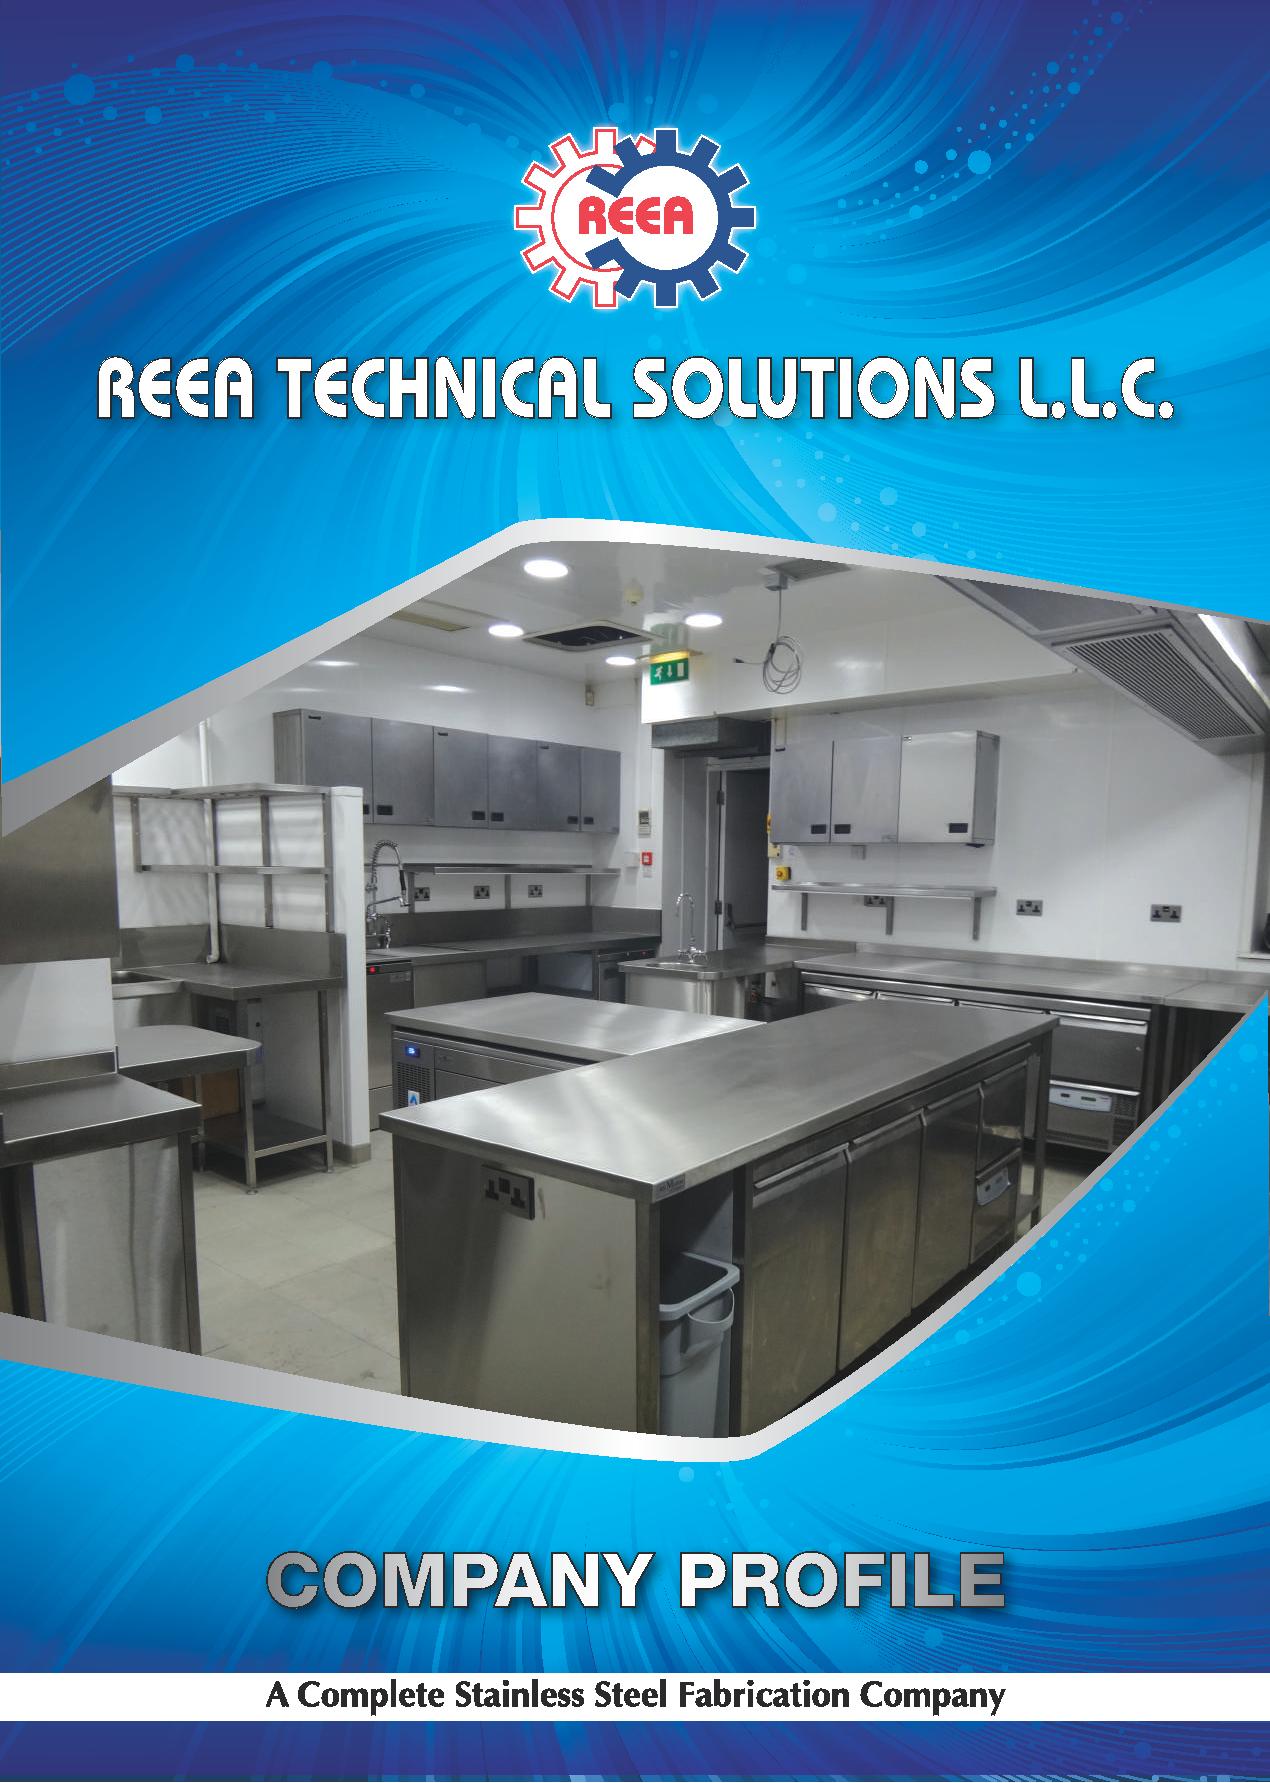 Reea Technical Solutions